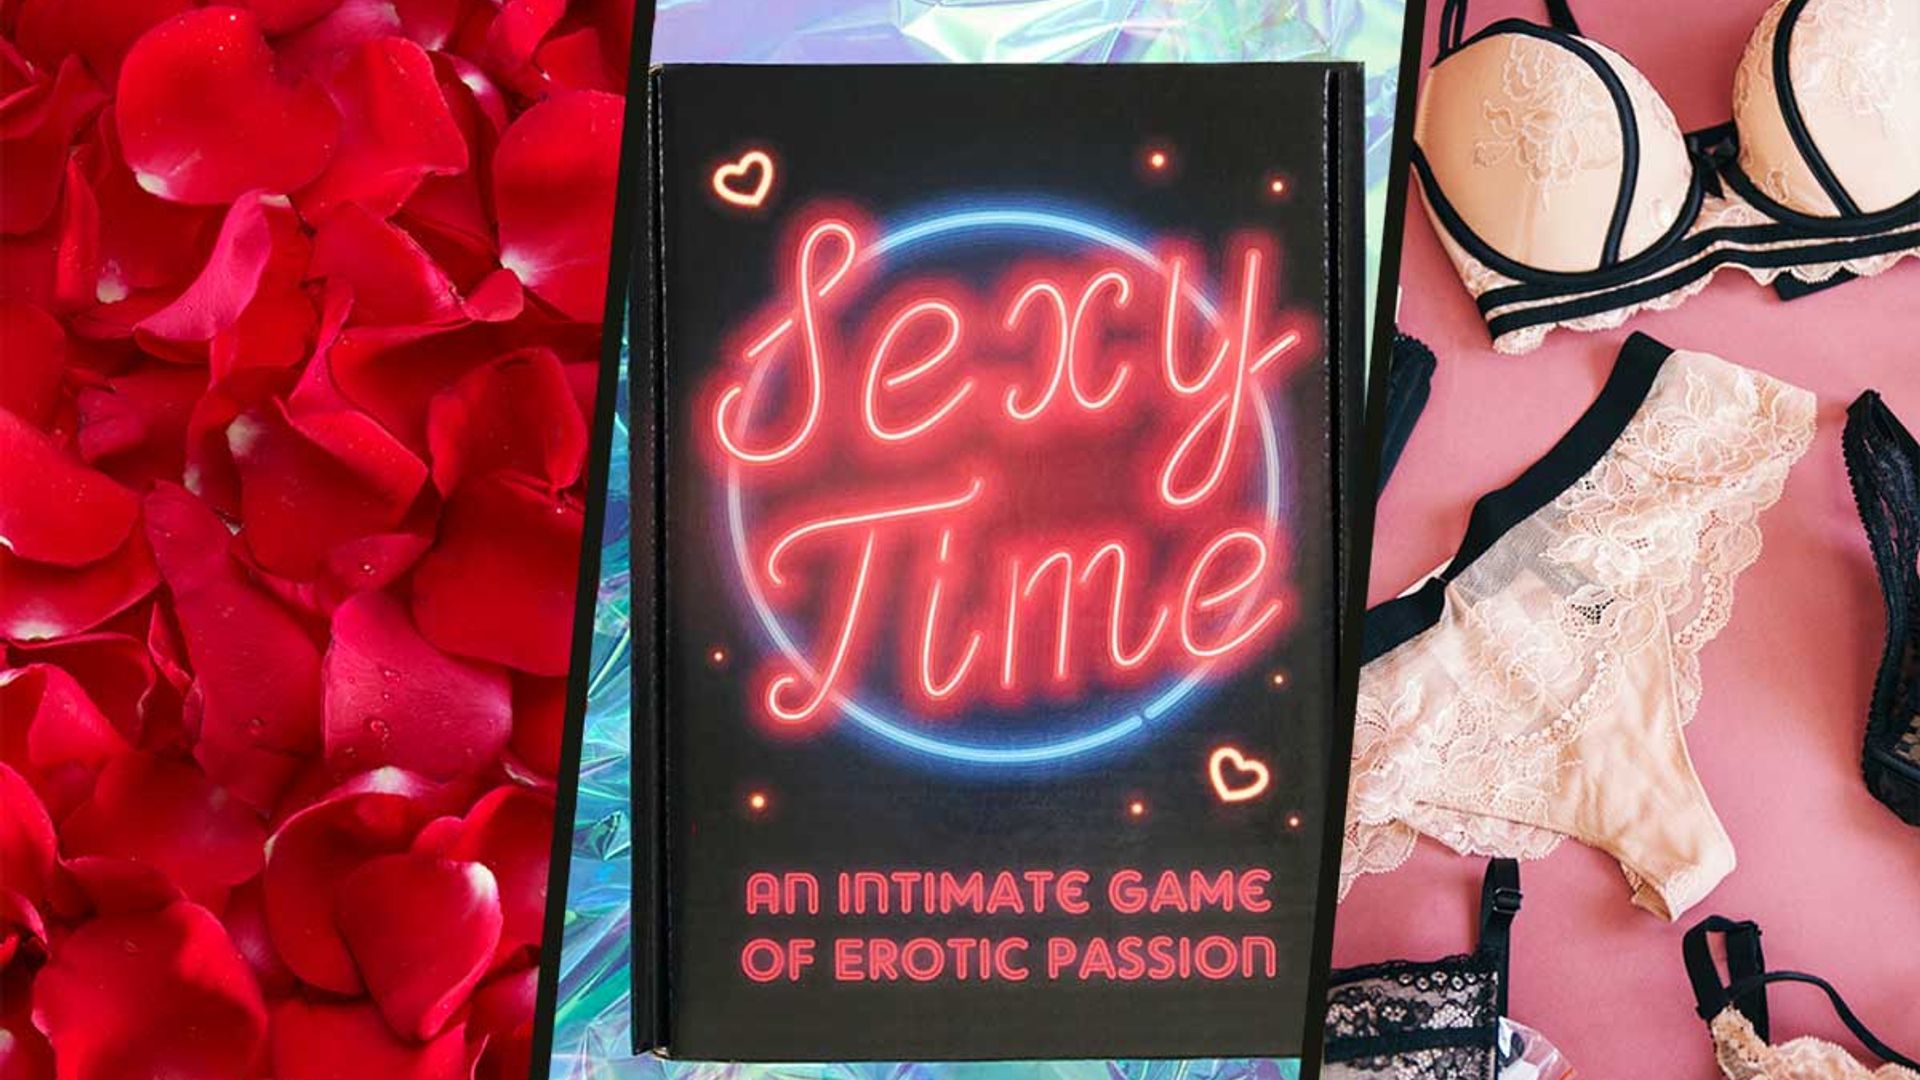 Best sexy gift ideas for a romantic date night this Valentine's Day